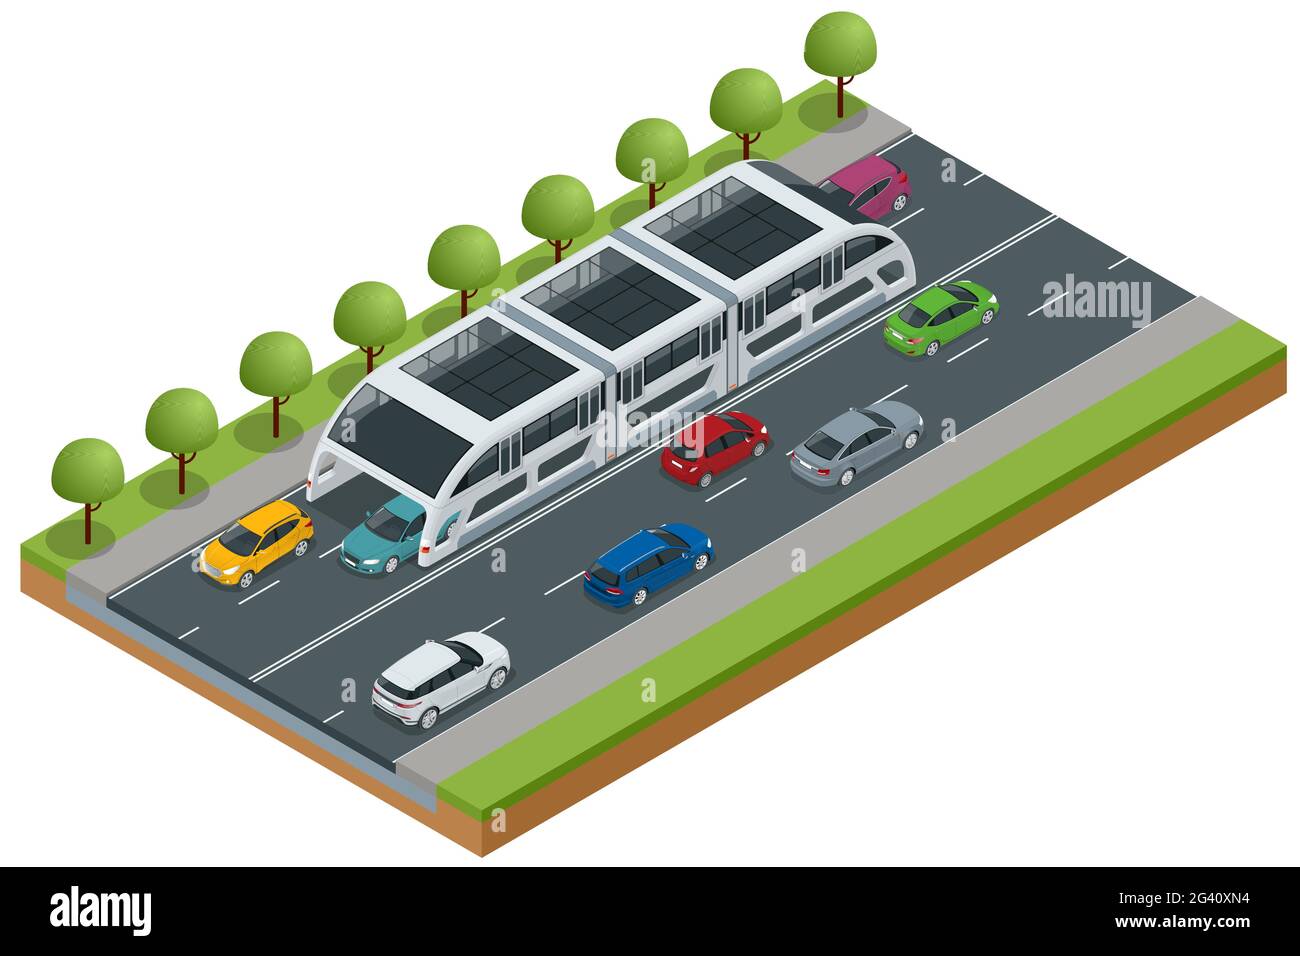 Isometric Transit Elevated Bus in China. Straddling bus, straddle bus, land airbus, or tunnel bus Road vehicle designed to carry many passengers. Stock Vector